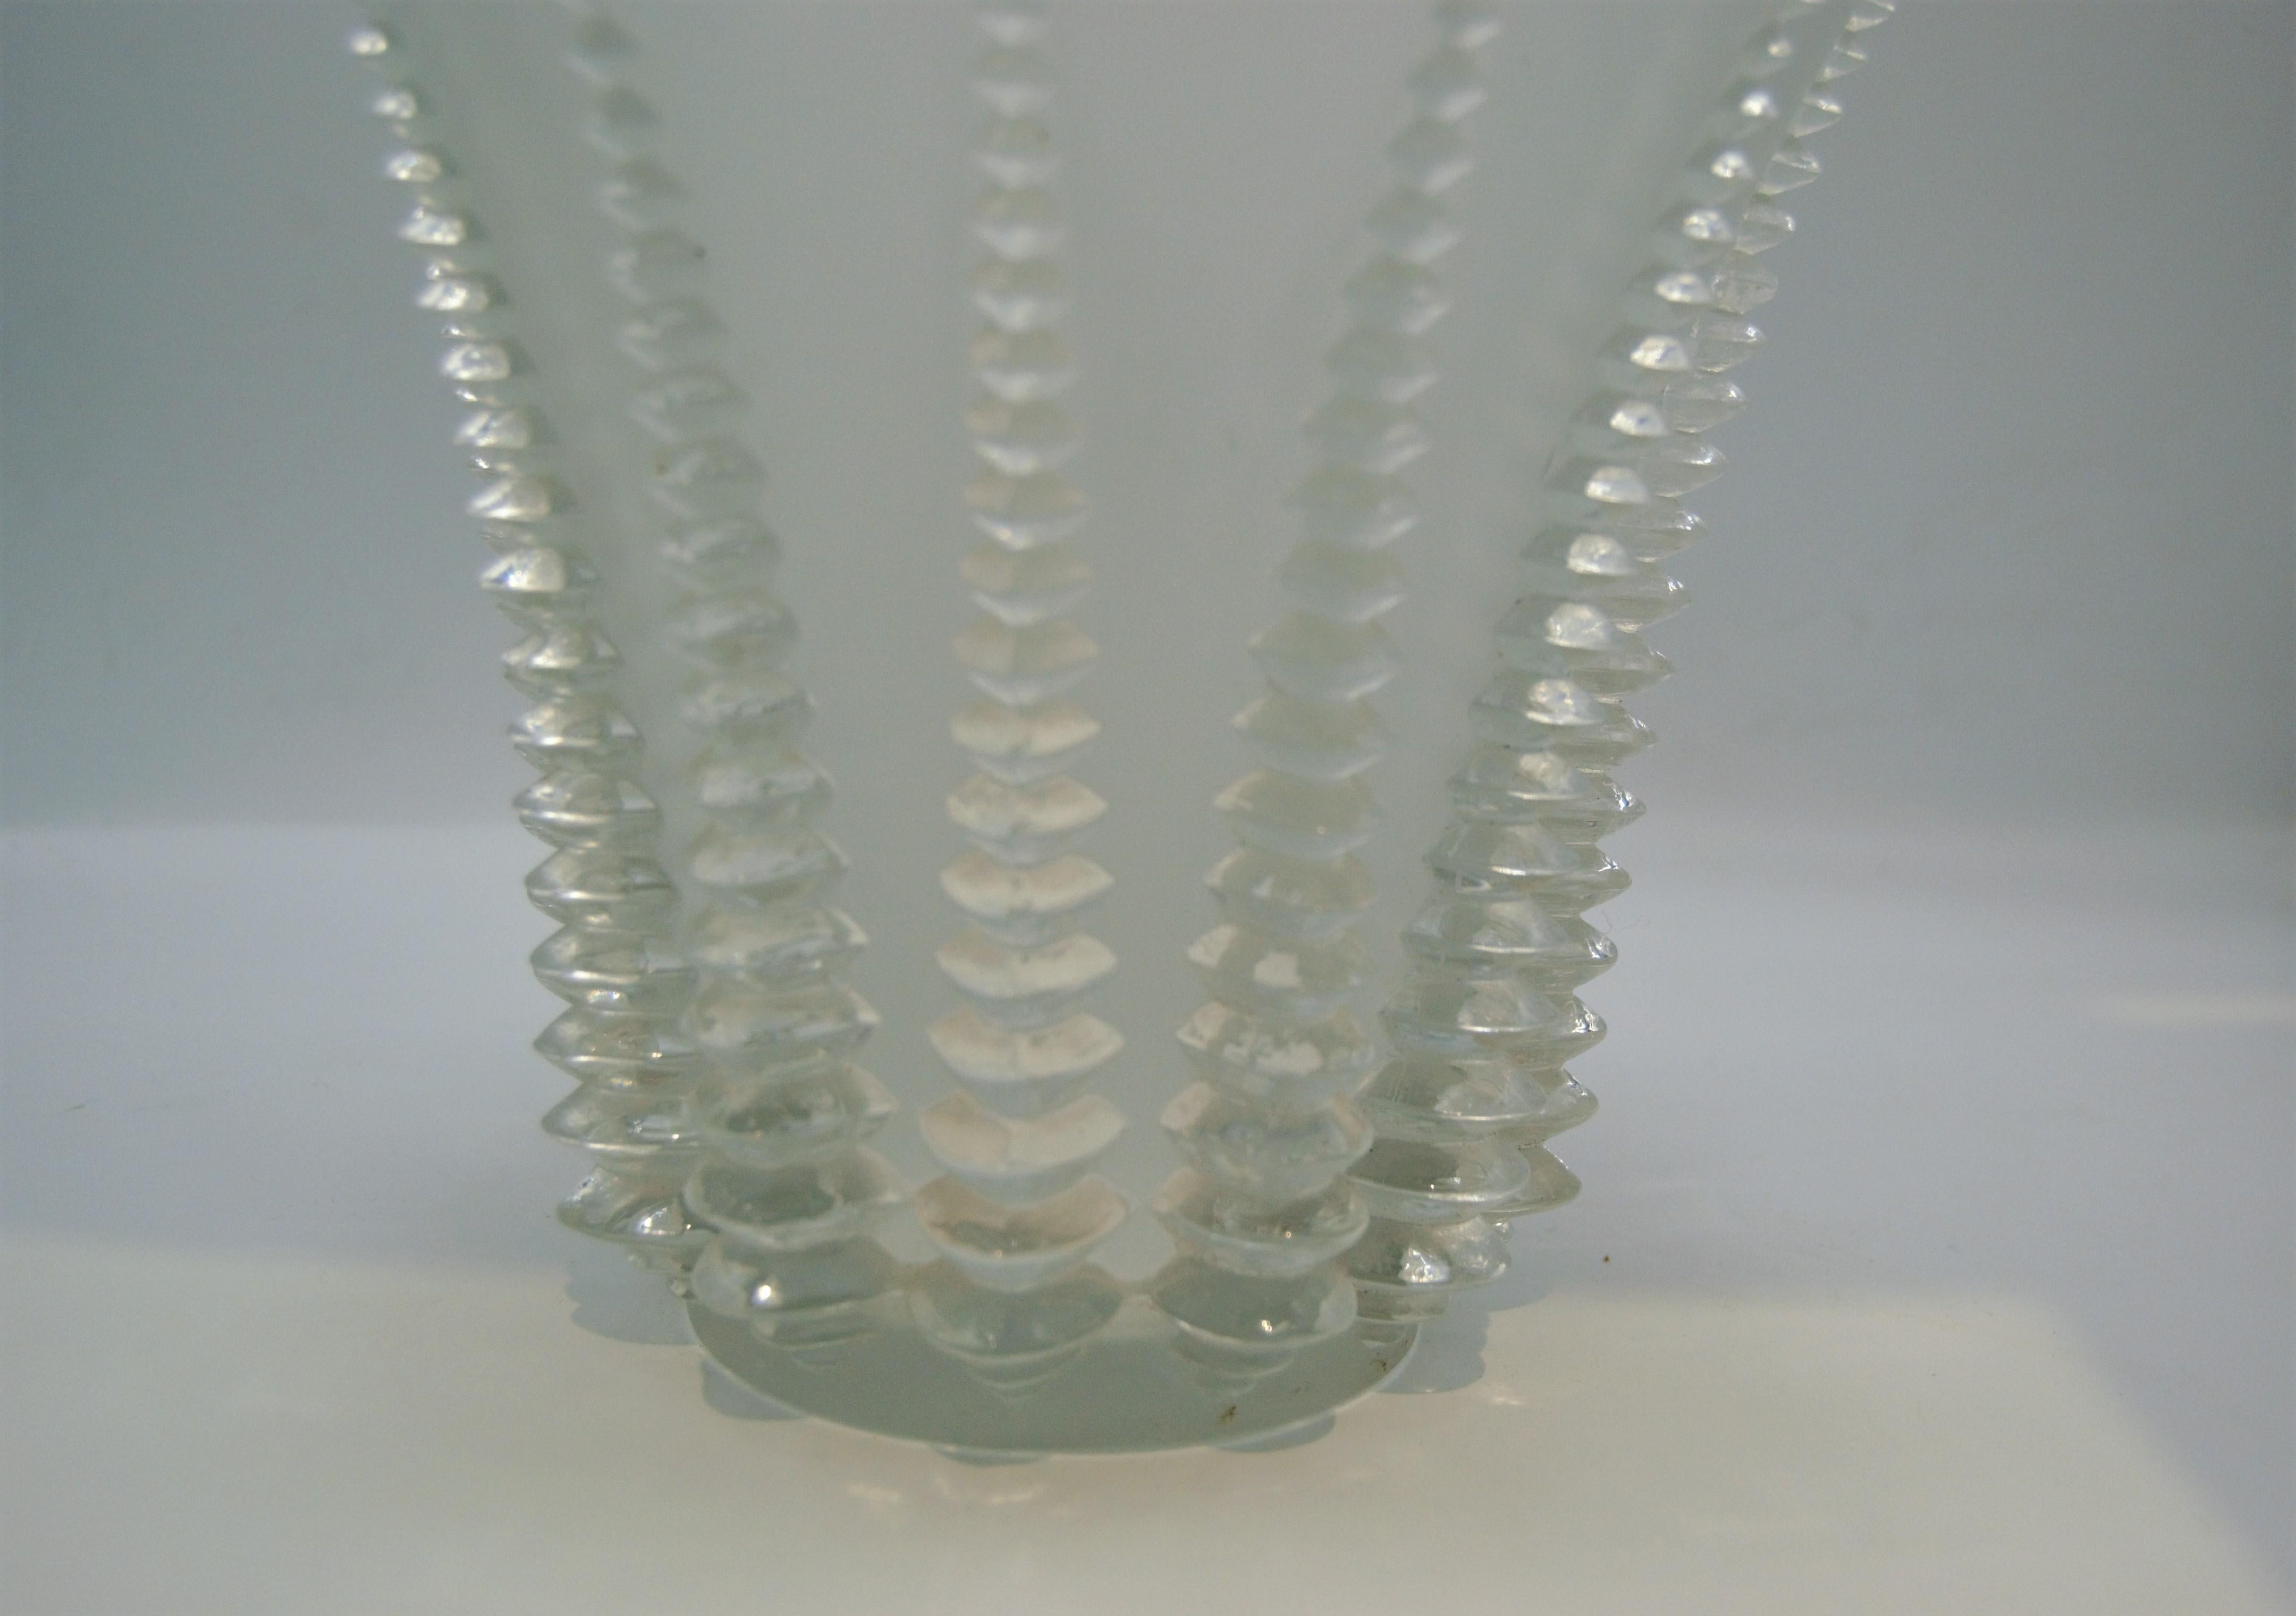 René Lalique
1860-1945.

A moulded glass vase by rene´ lalique,
Design created in 1936.
Measures: Height 8.66 in x diamètre 9.45 in
Signed.

Vase 